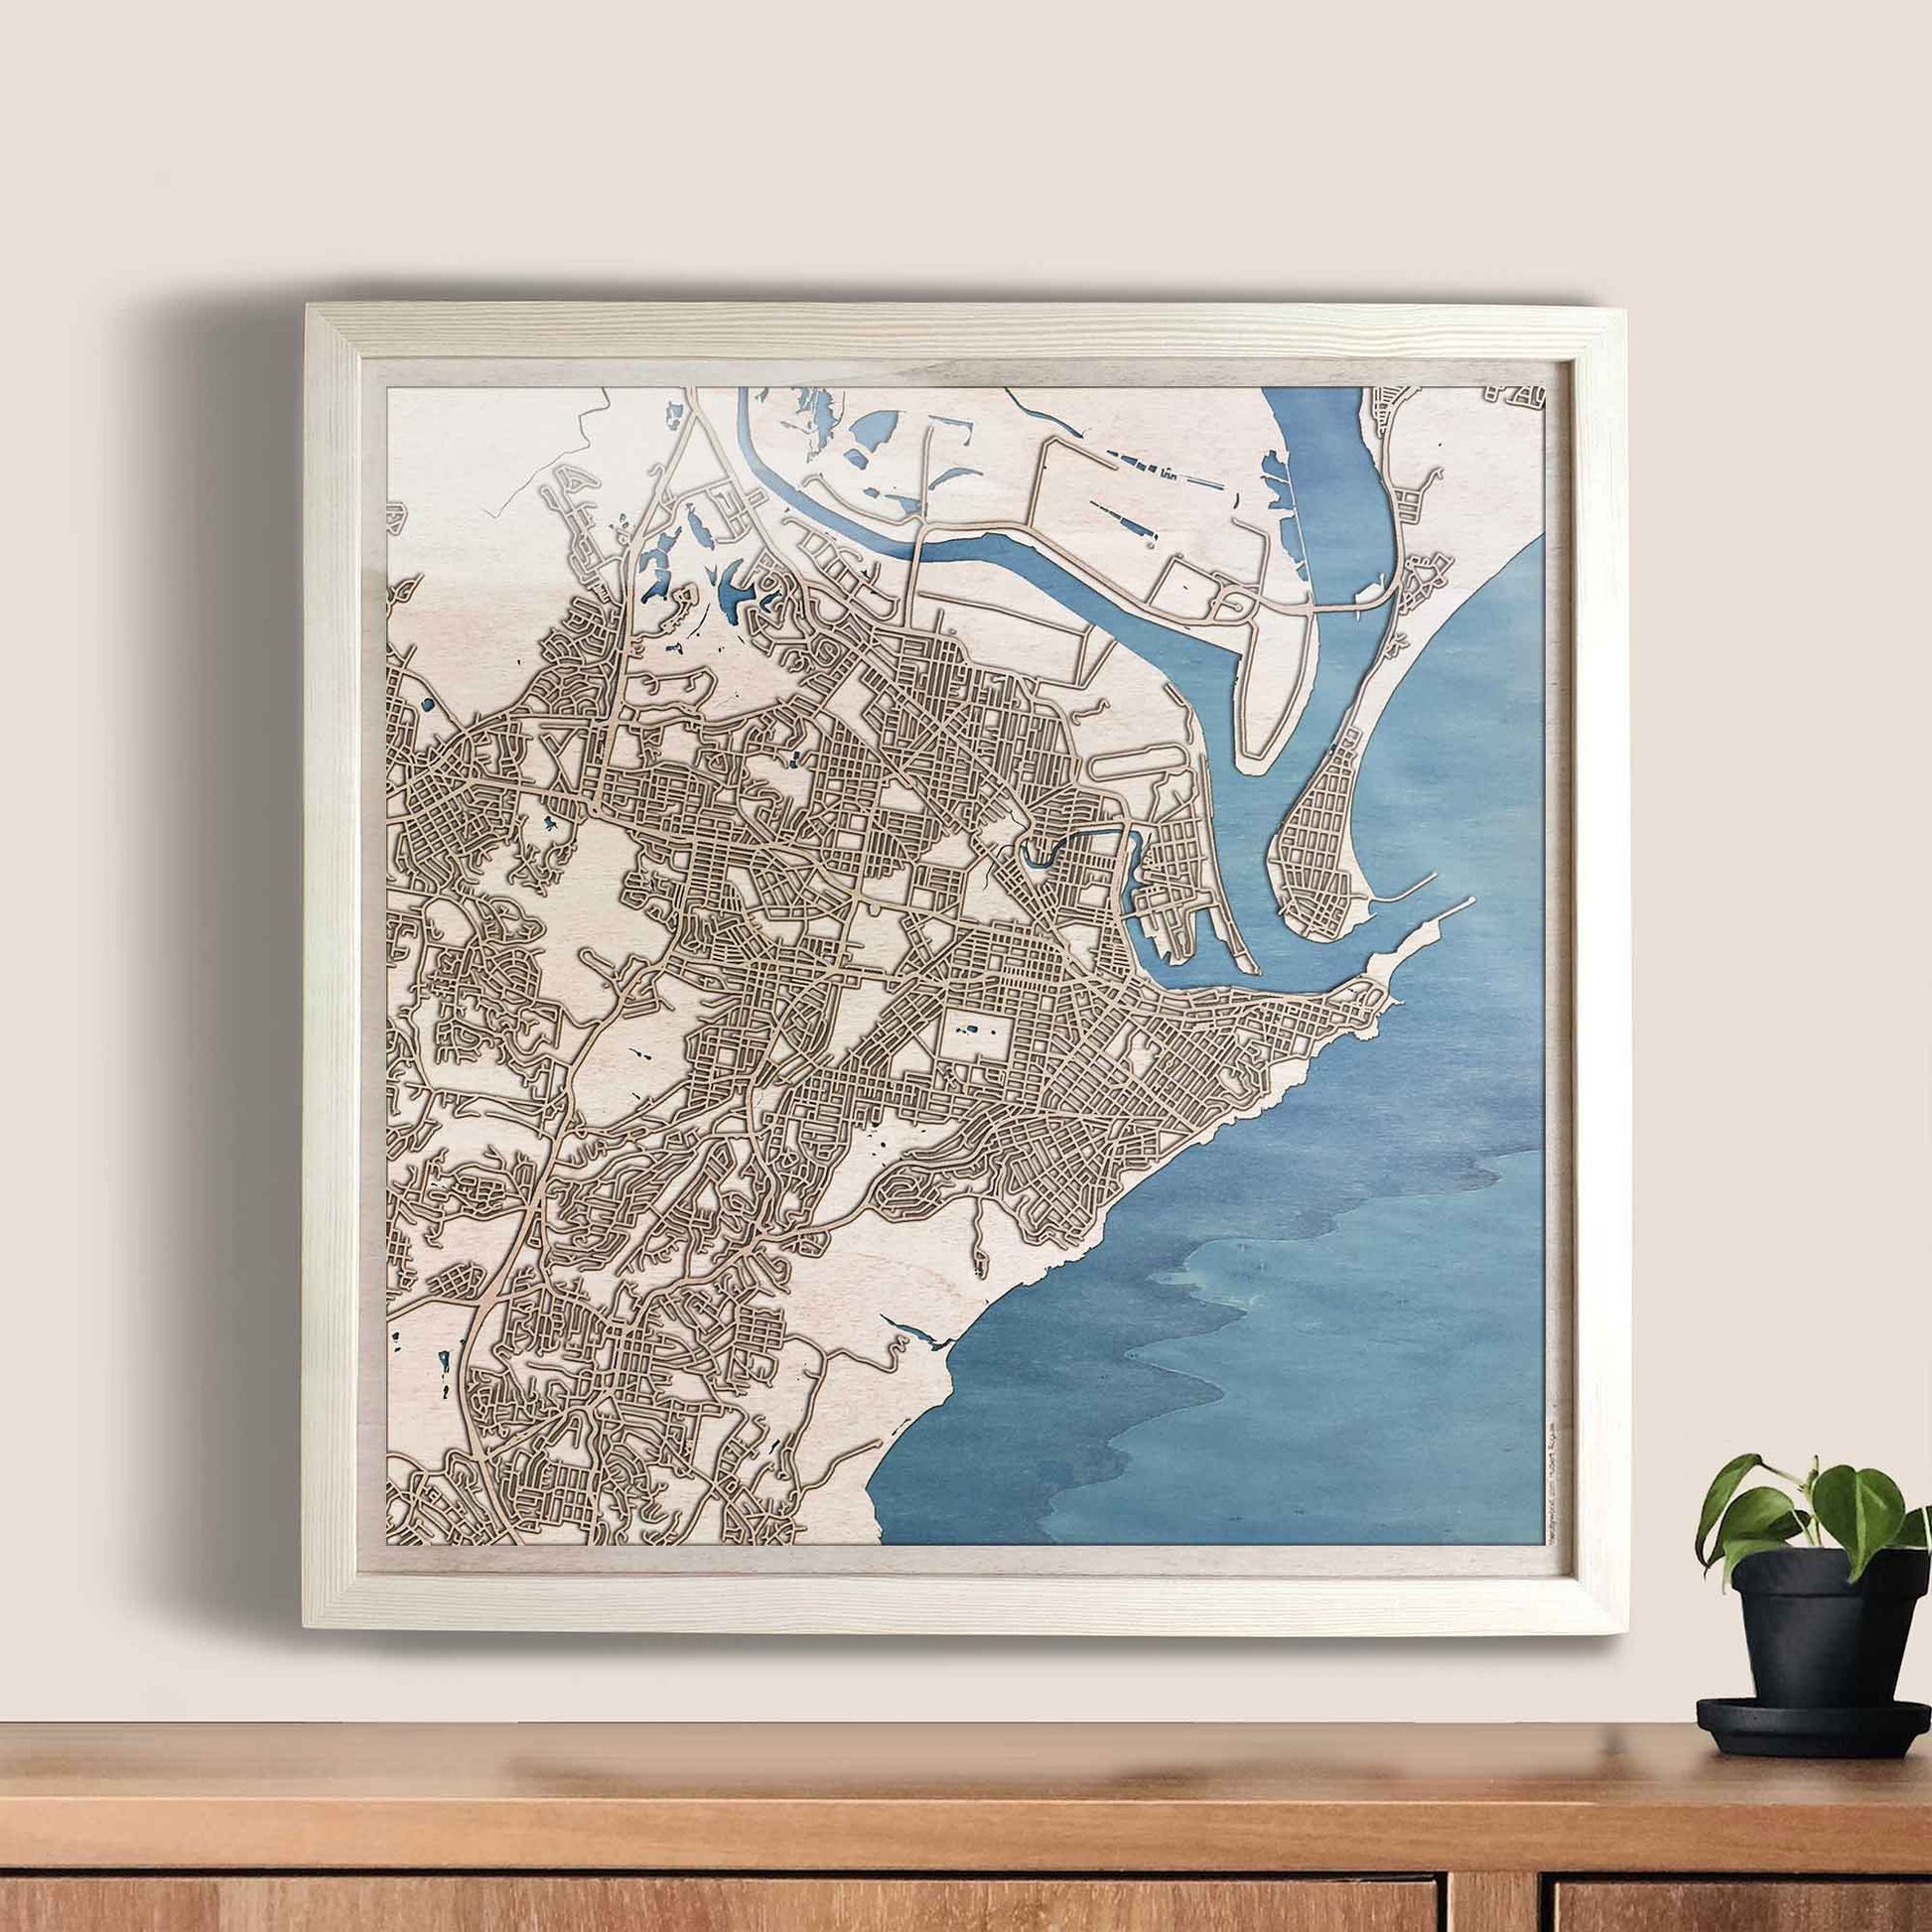 Newcastle Wooden Map by CityWood - Custom Wood Map Art - Unique Laser Cut Engraved - Anniversary Gift